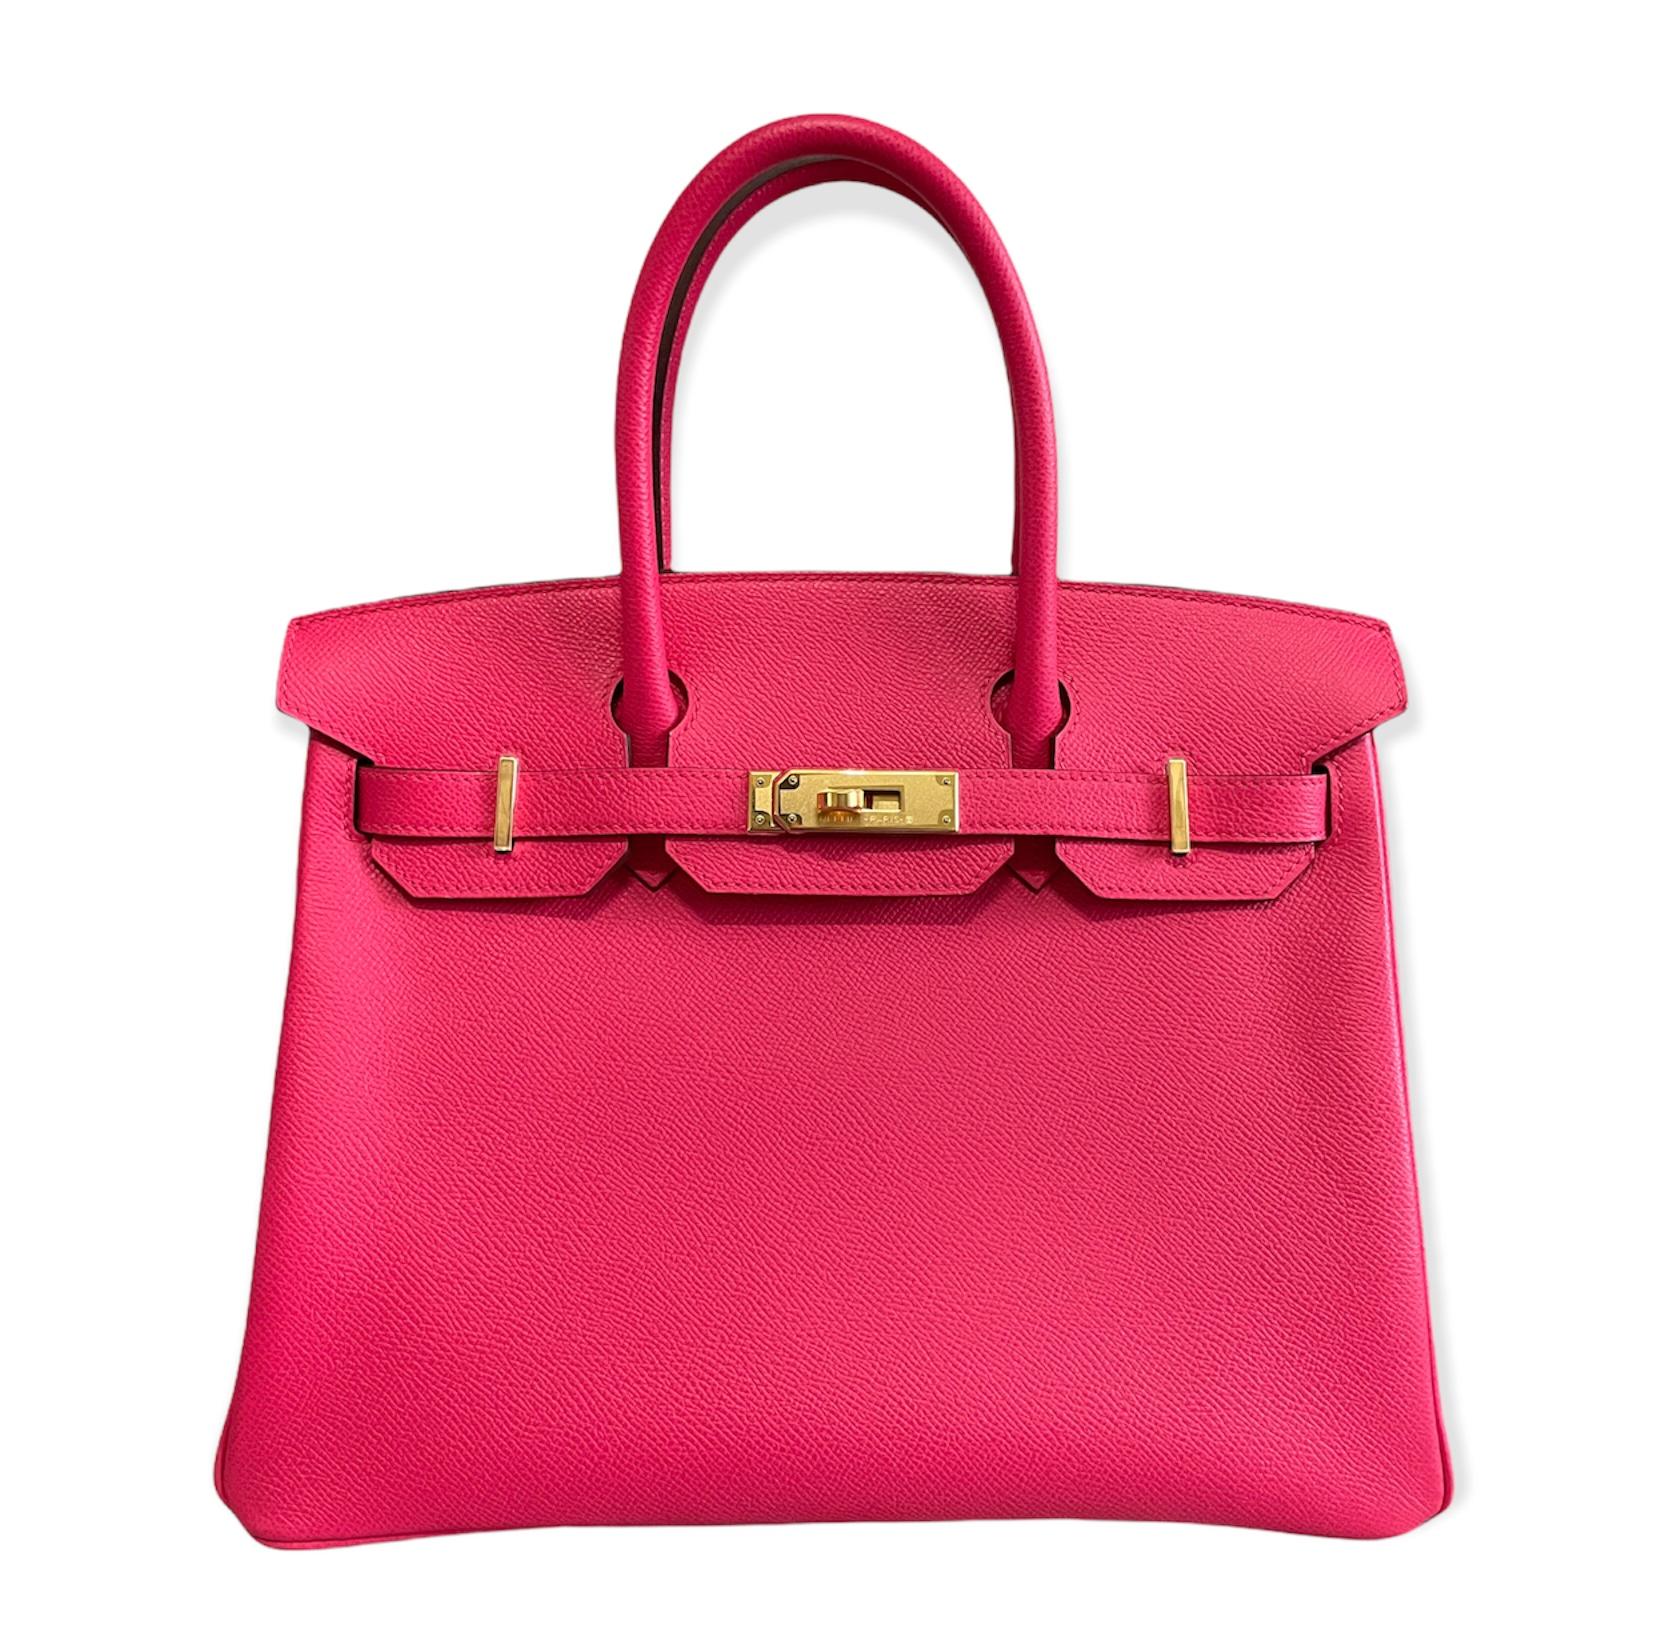 Stunning As New Hermes Birkin 30 Rose Extreme Pink Epsom Gold Hardware. As New with Plastic on all Hardware and Feet, Excellent corners and Structure. D Stamp 2019.

Shop with confidence from Lux Addicts. Authenticity Guaranteed!